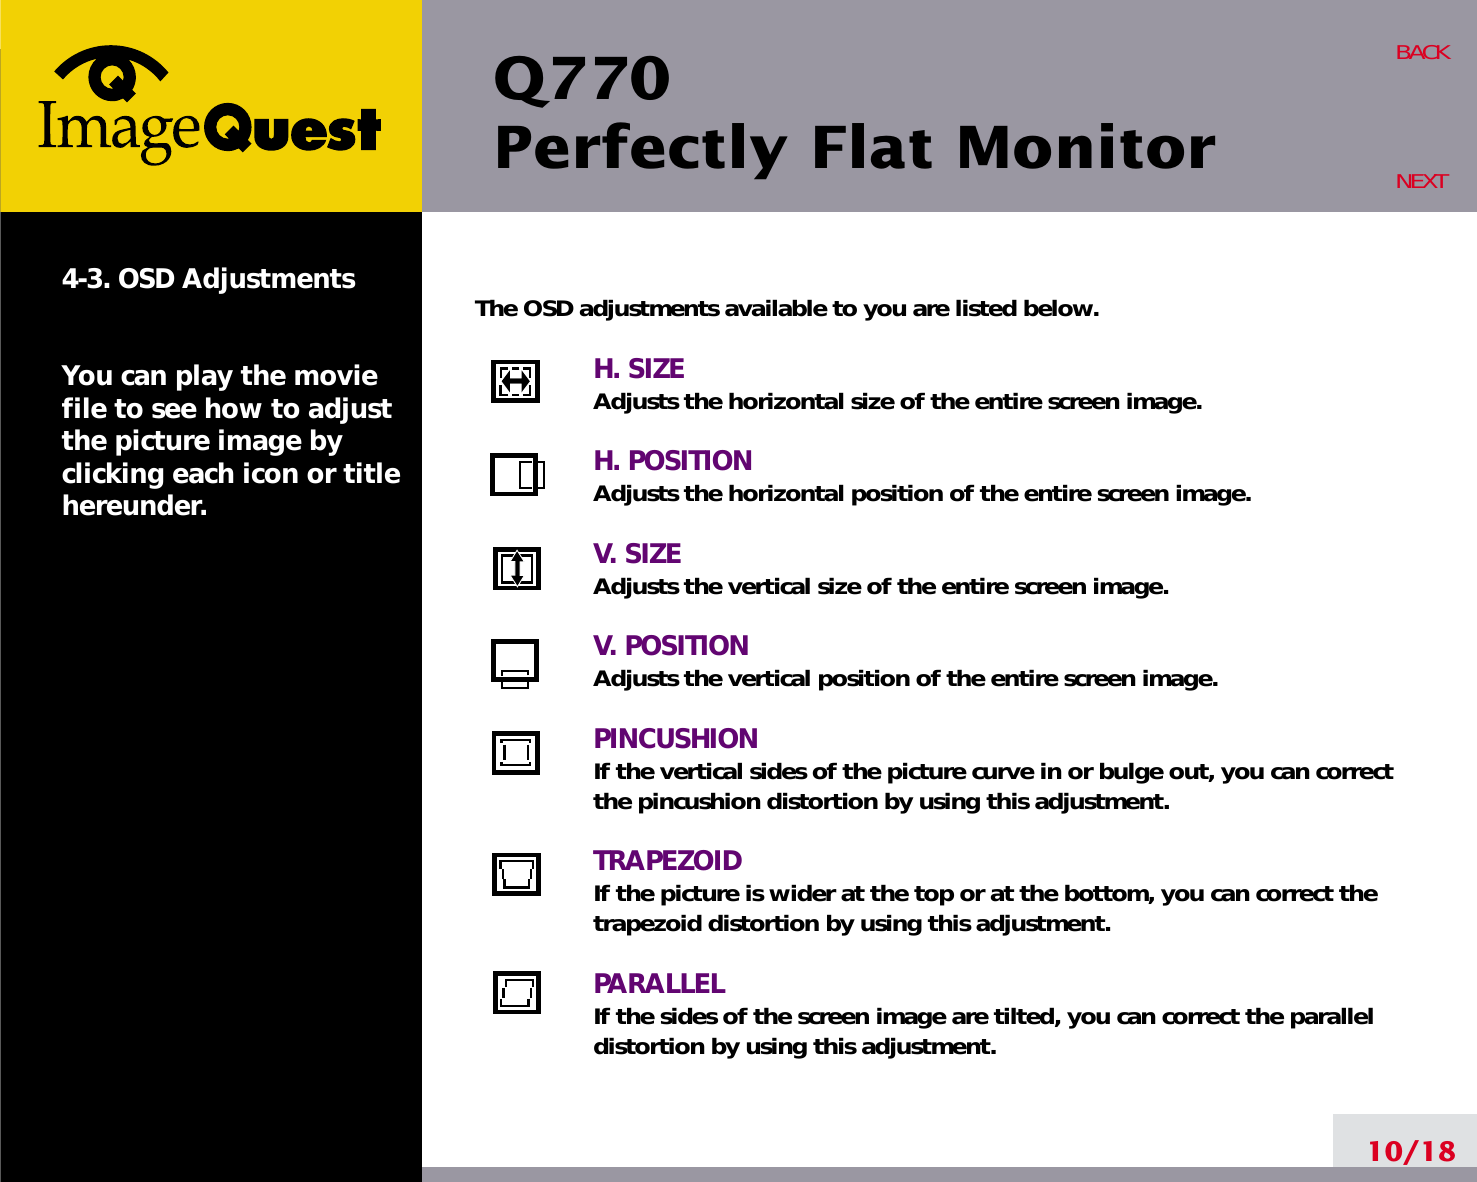 Q770Perfectly Flat Monitor10/18BACKNEXT4-3. OSD AdjustmentsYou can play the moviefile to see how to adjustthe picture image byclicking each icon or titlehereunder.The OSD adjustments available to you are listed below.H. SIZEAdjusts the horizontal size of the entire screen image.H. POSITIONAdjusts the horizontal position of the entire screen image.V. SIZEAdjusts the vertical size of the entire screen image.V. POSITIONAdjusts the vertical position of the entire screen image.PINCUSHIONIf the vertical sides of the picture curve in or bulge out, you can correctthe pincushion distortion by using this adjustment.TRAPEZOIDIf the picture is wider at the top or at the bottom, you can correct thetrapezoid distortion by using this adjustment.PARALLELIf the sides of the screen image are tilted, you can correct the paralleldistortion by using this adjustment.